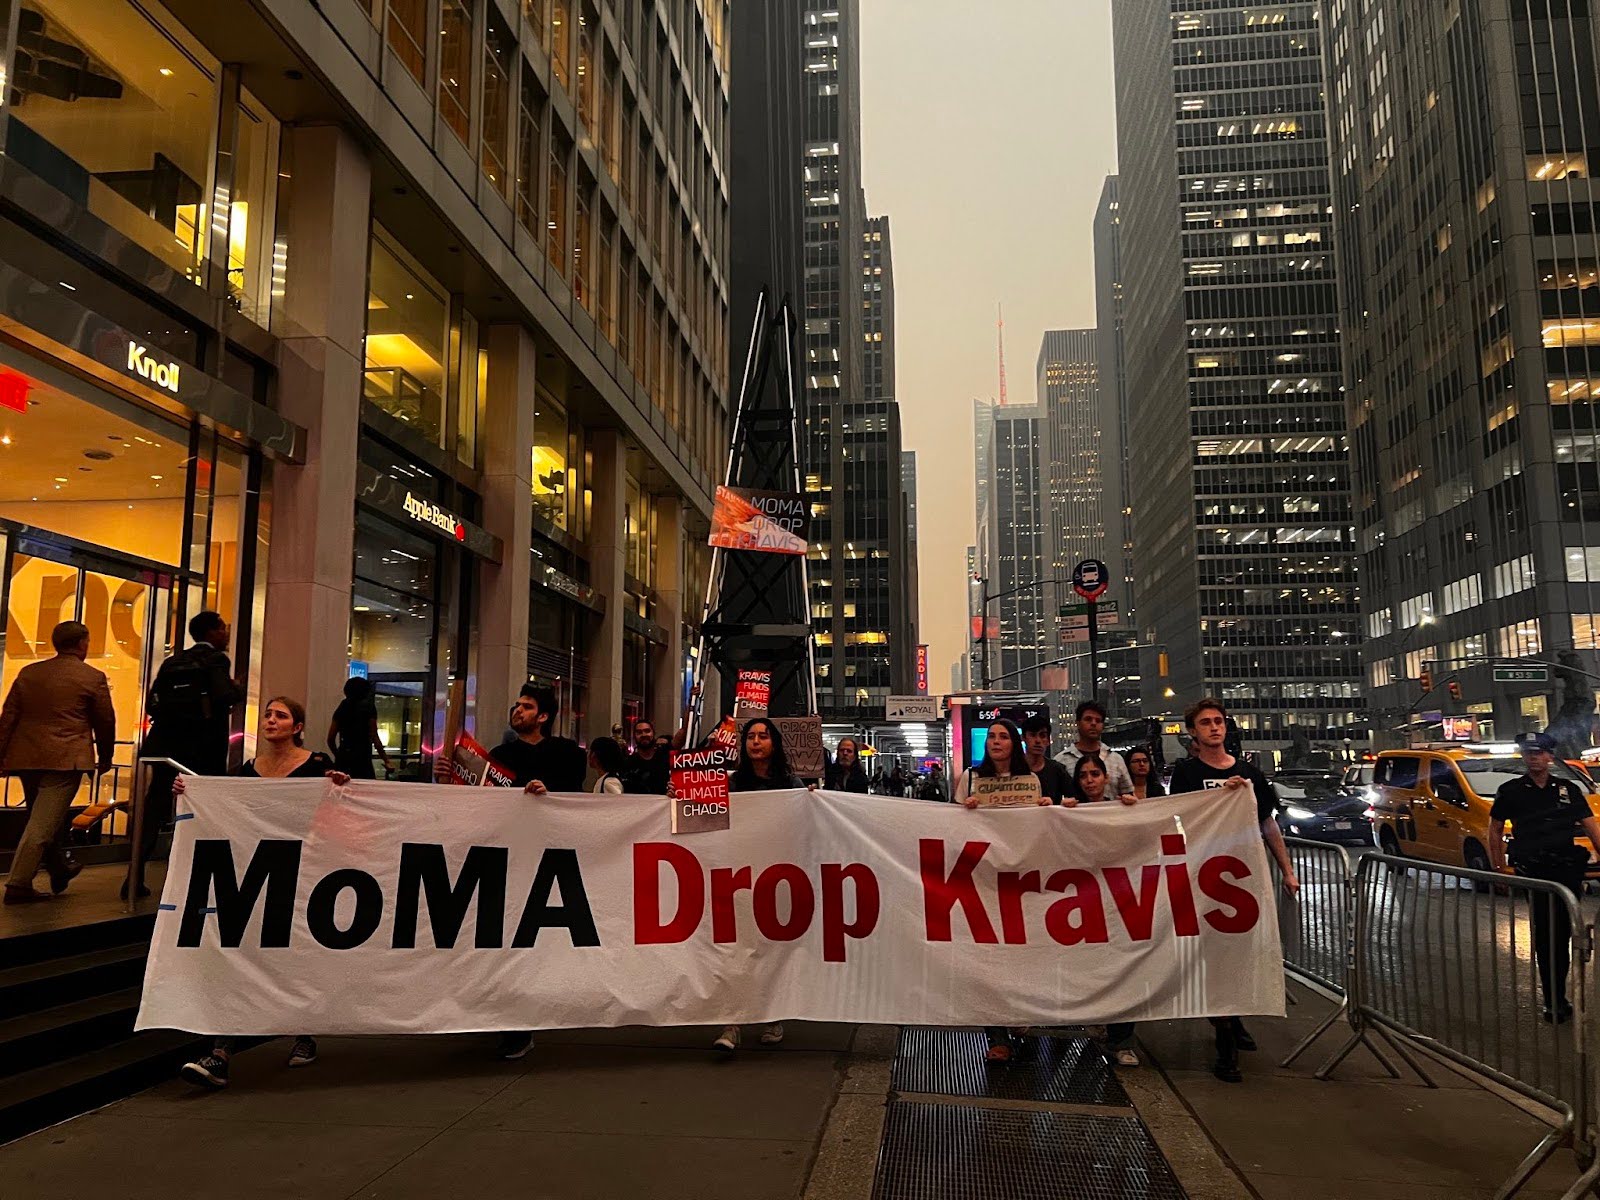 A crowd of activists marching in a city street holding the banner "MoMA Drop Kravis"